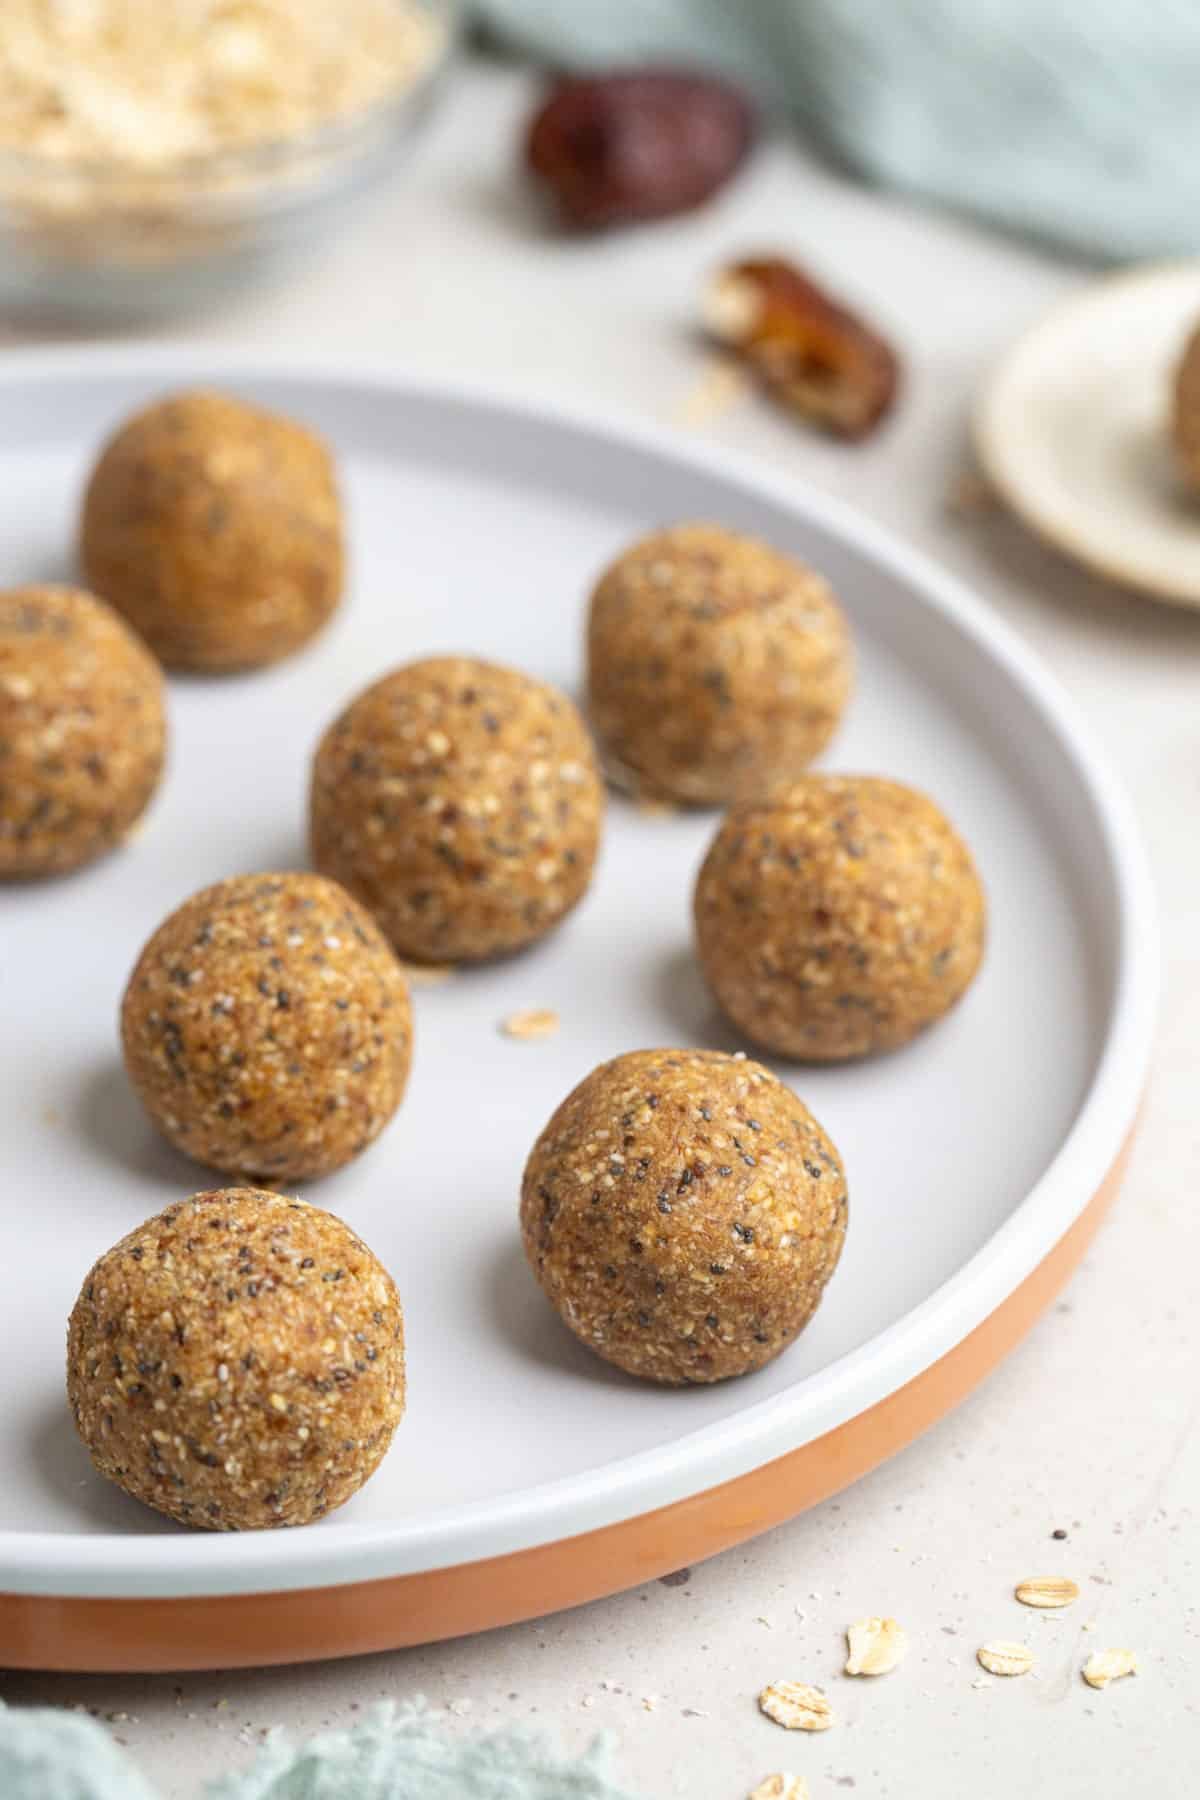 caramel bliss balls on a white plate, with oats.